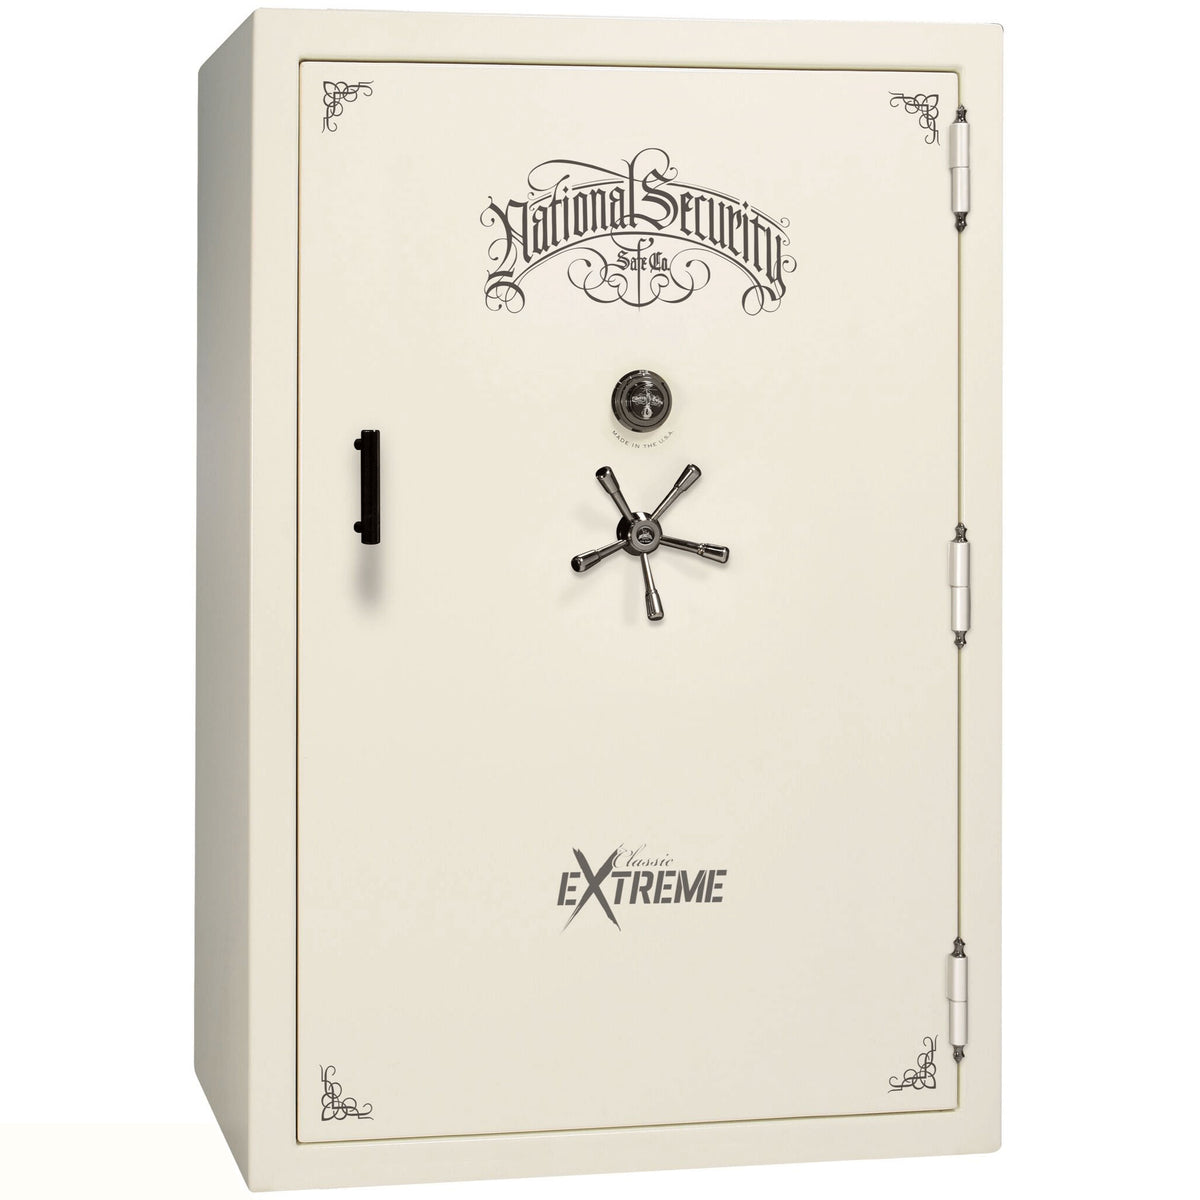 Liberty Classic Select Extreme Wide Body Safe in White Marble with Black Chrome Mechanical Lock.